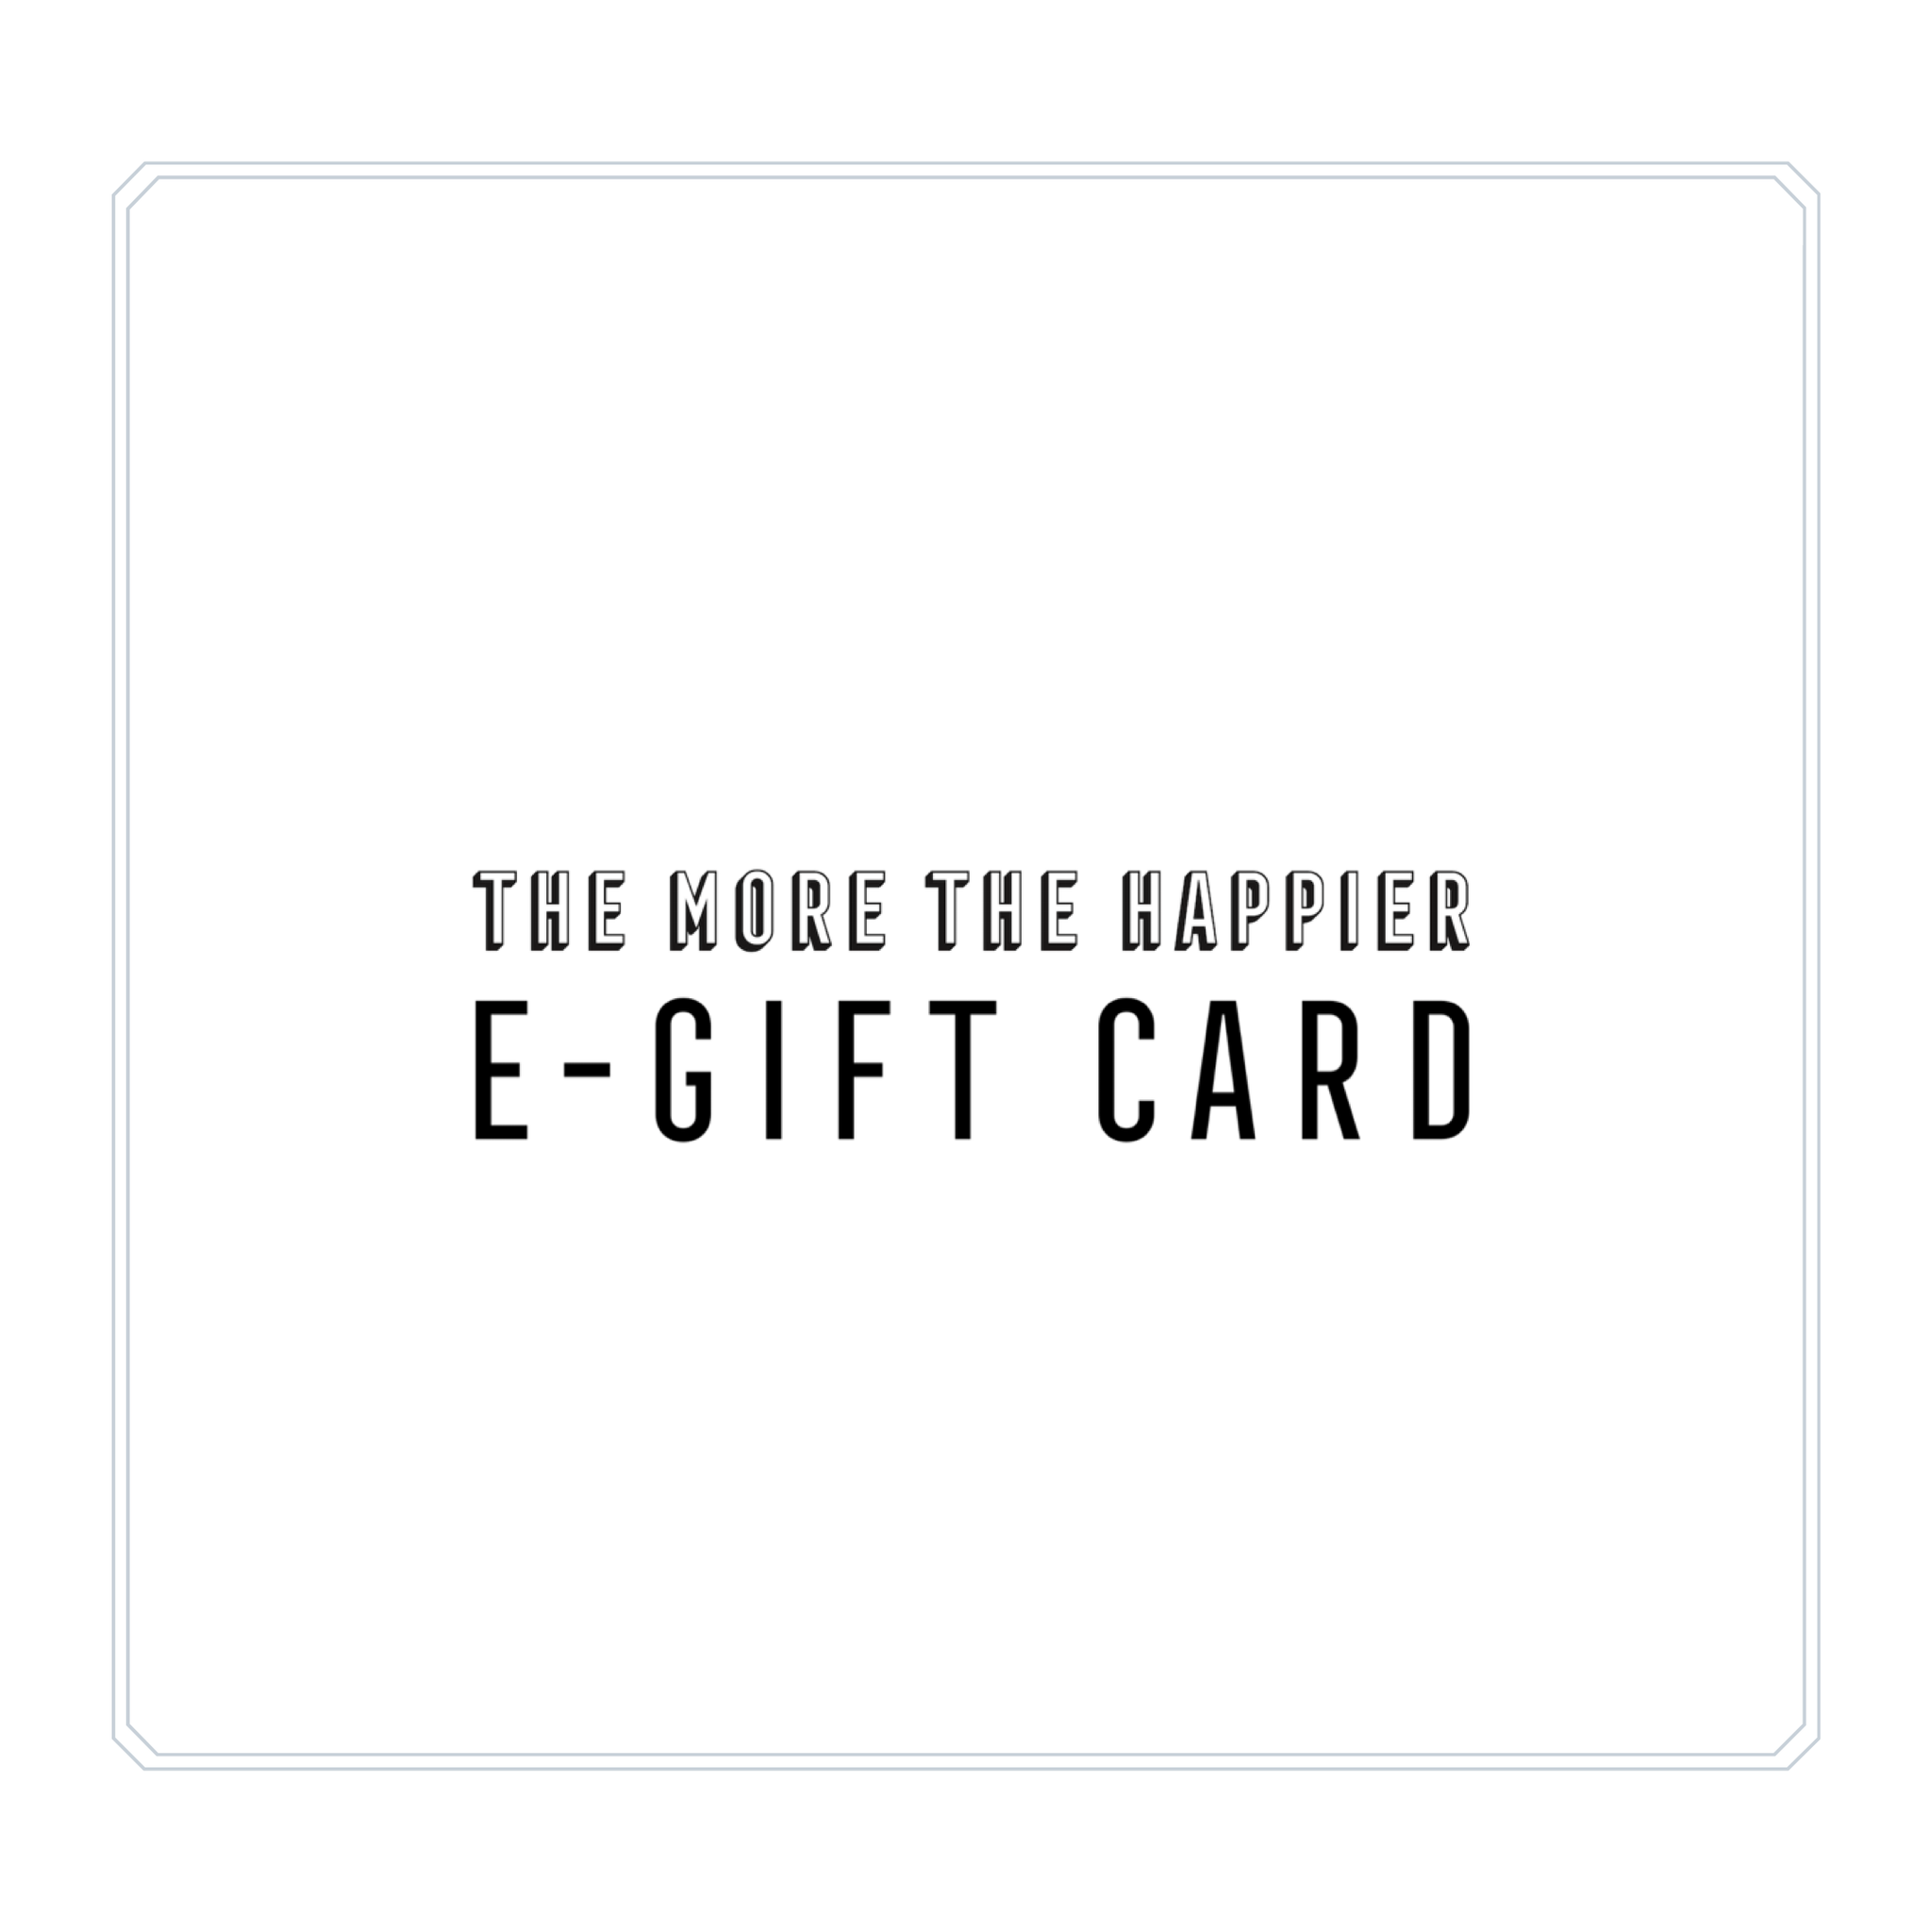 THE MORE THE HAPPIER offers online gift cards for your convenient shopping and gift giving!